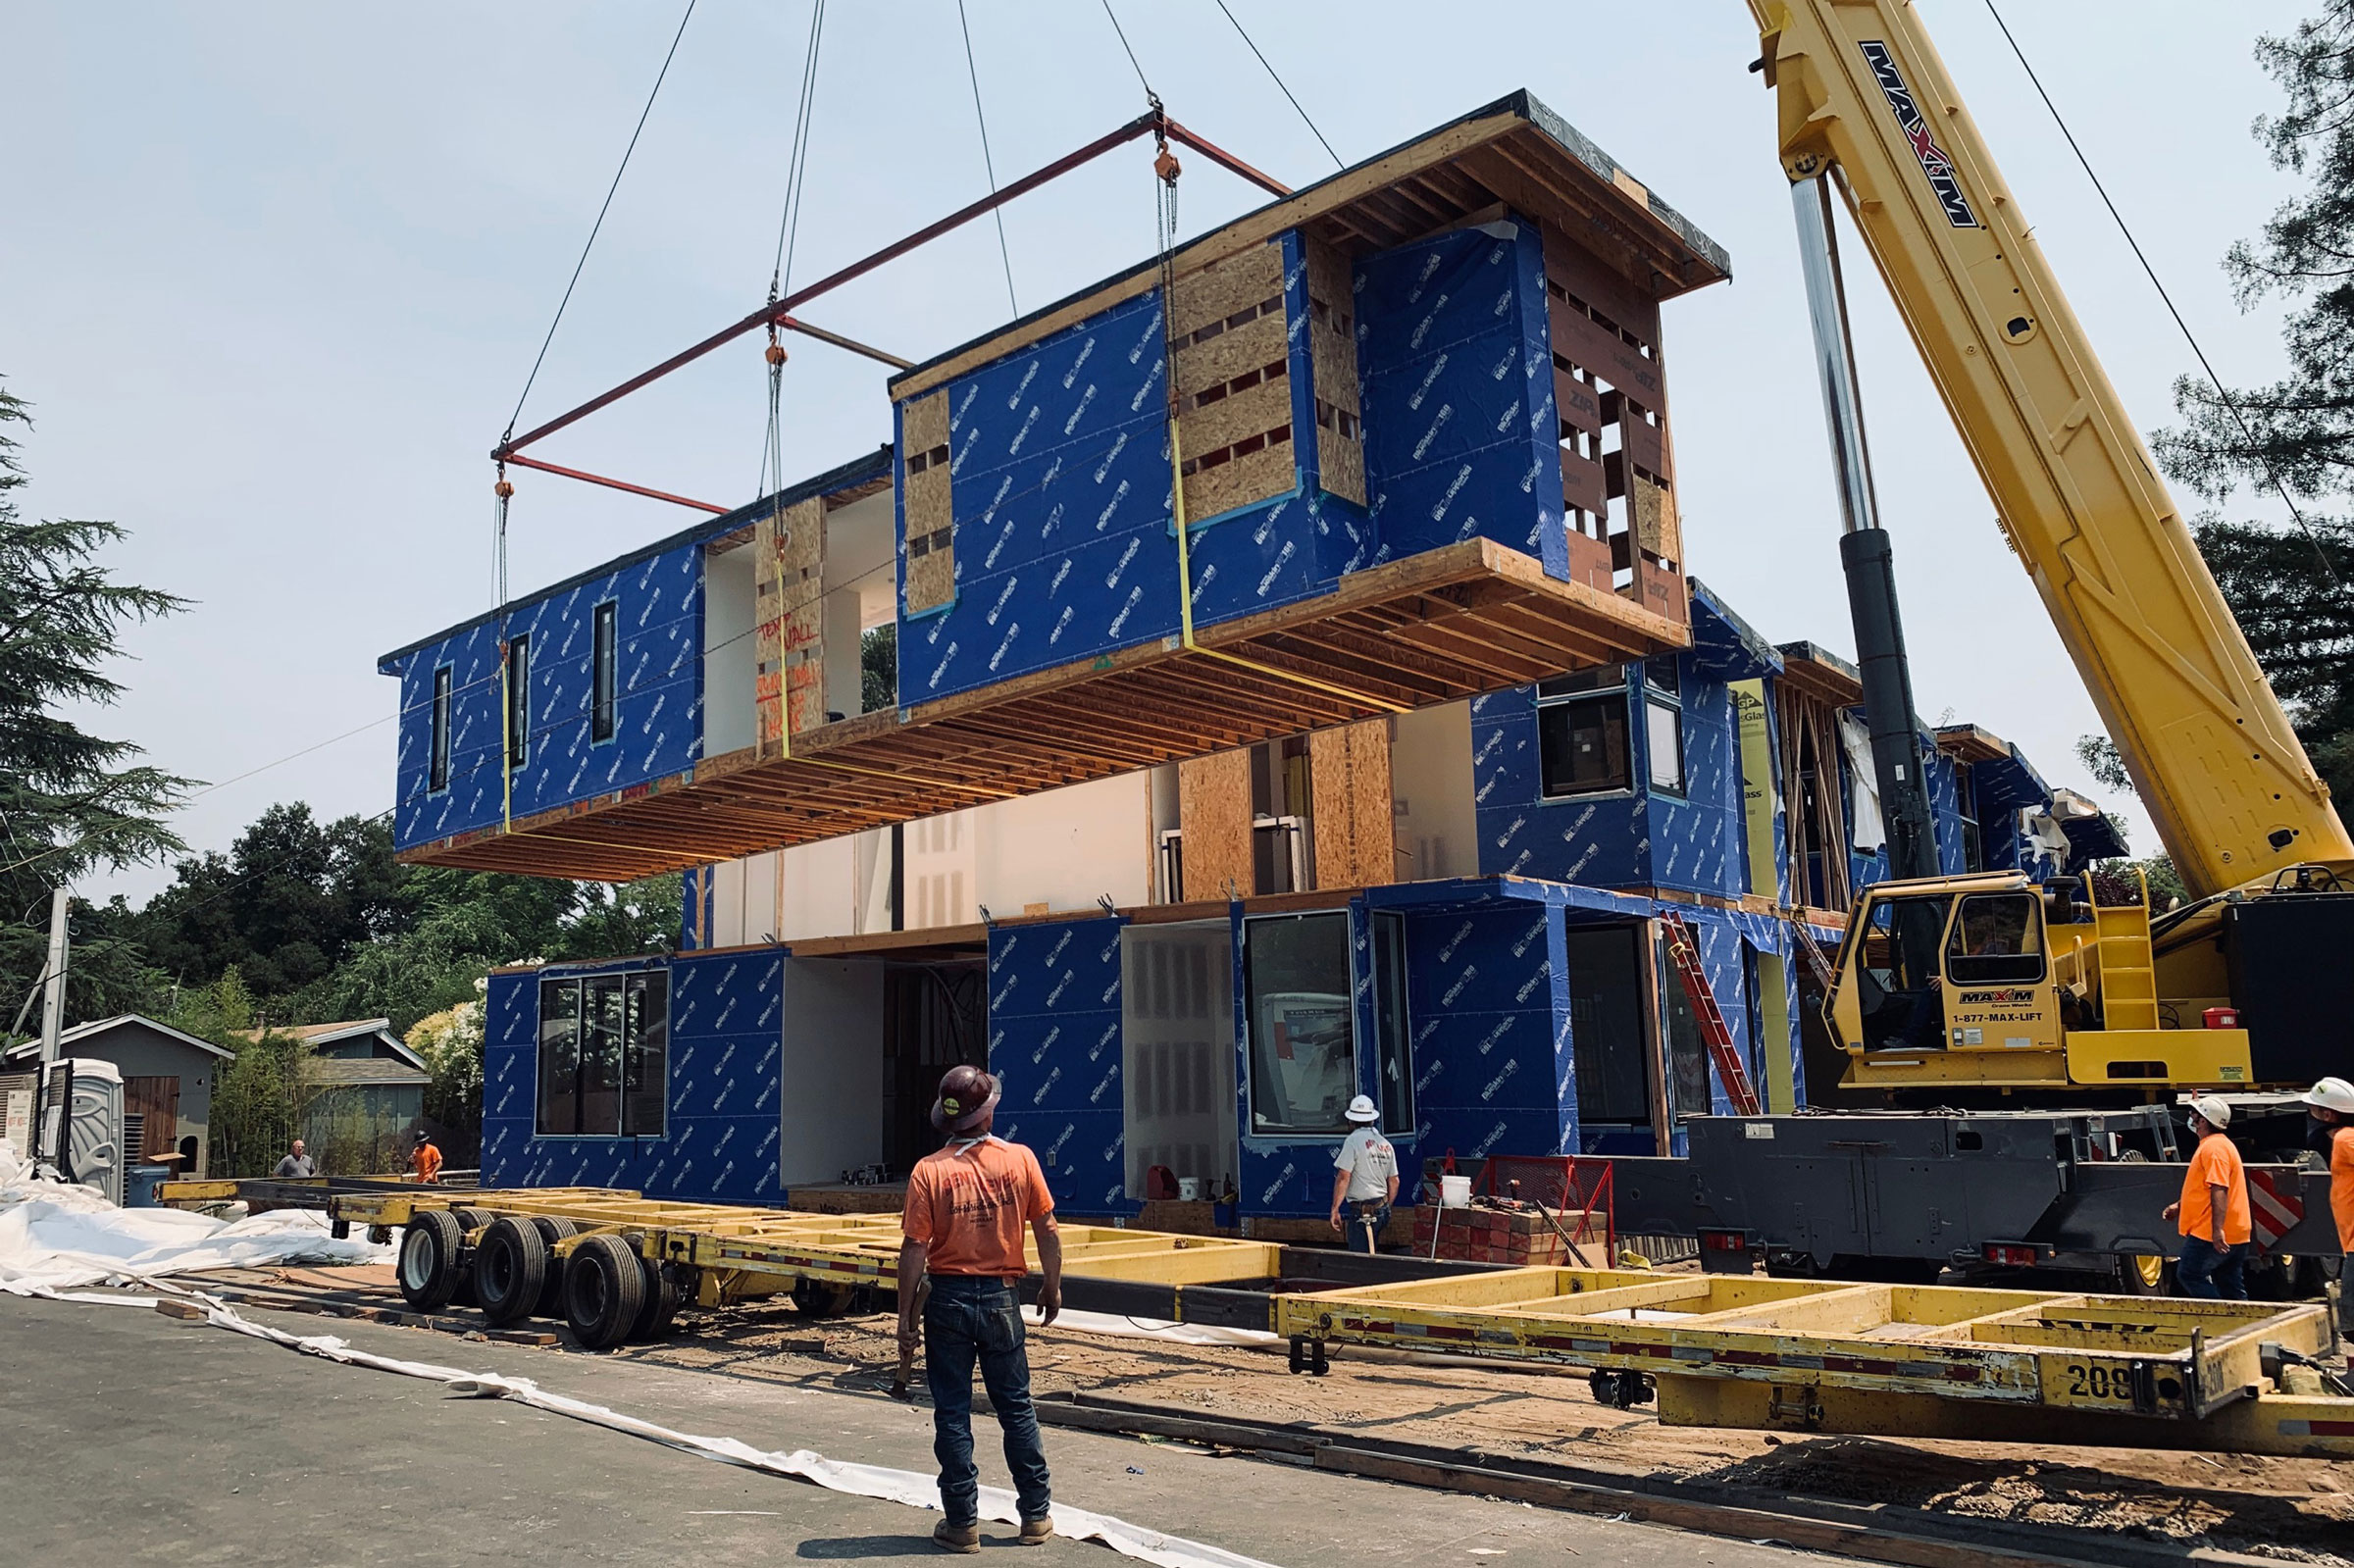 This Modern Prefab Building Was Constructed in Just 3 Days